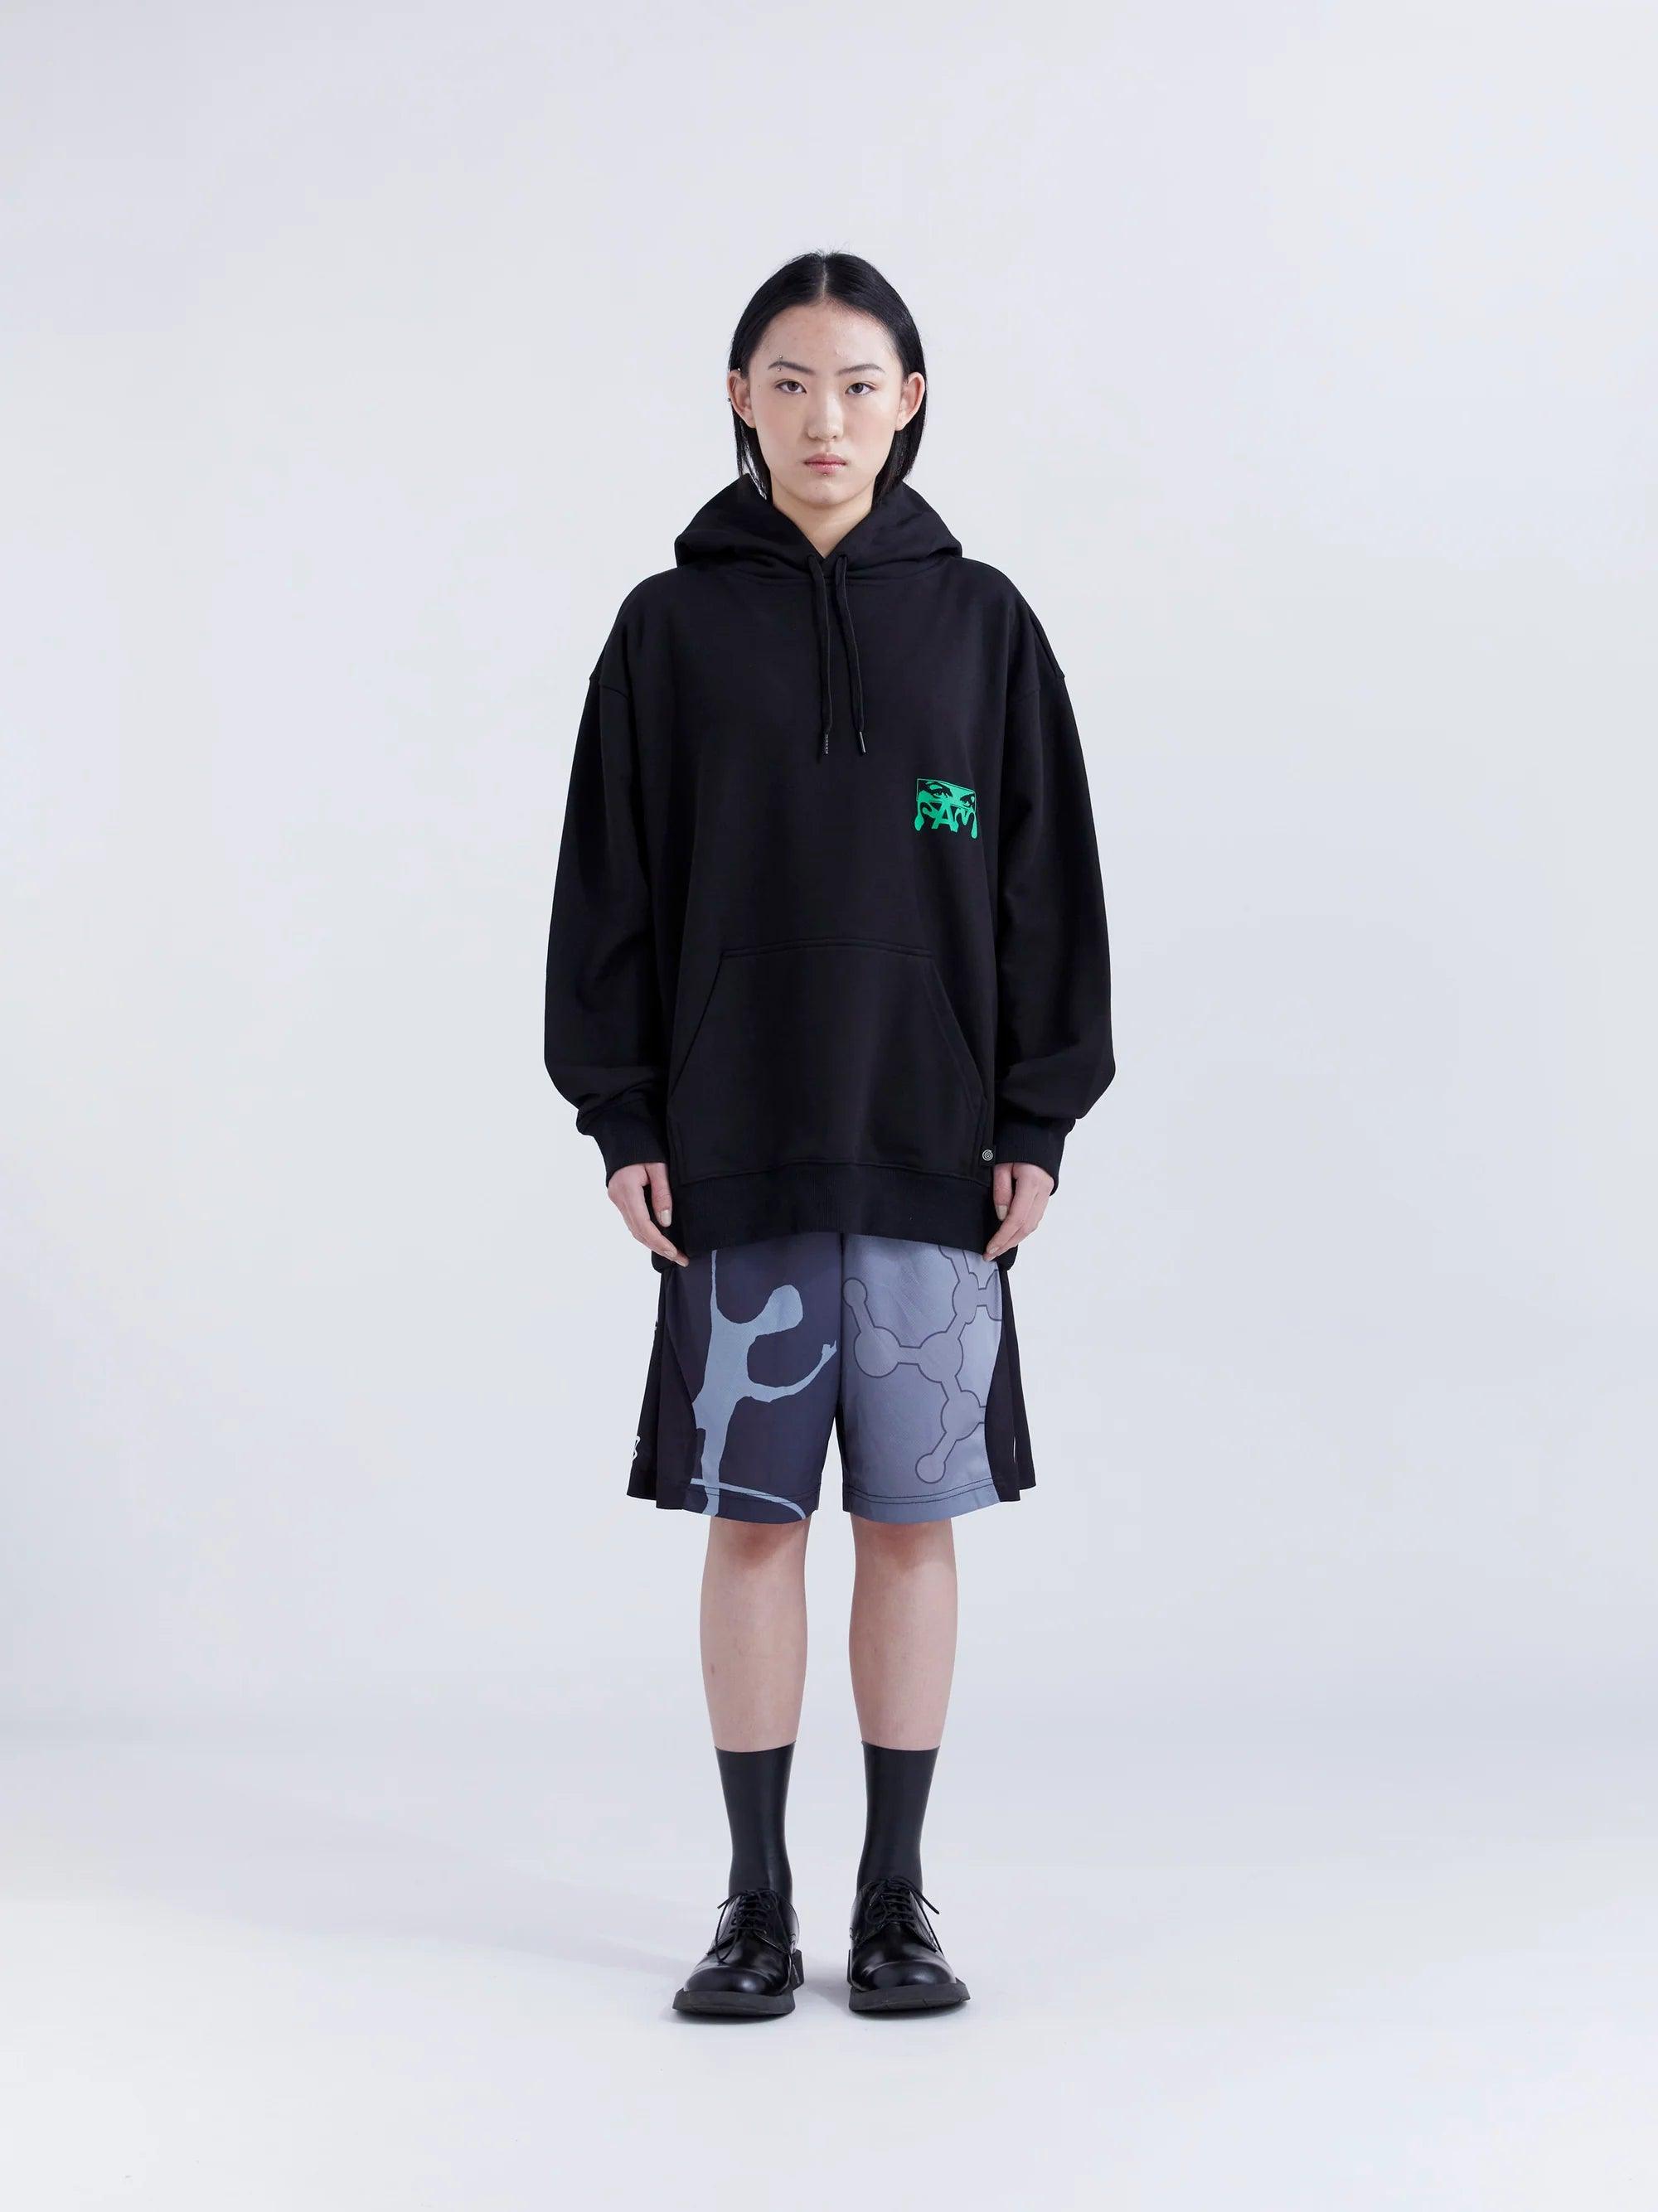 PAM / Perks and Mini MS-DOS Logo Hooded sweat - Black - SUPERCONSCIOUS BERLIN